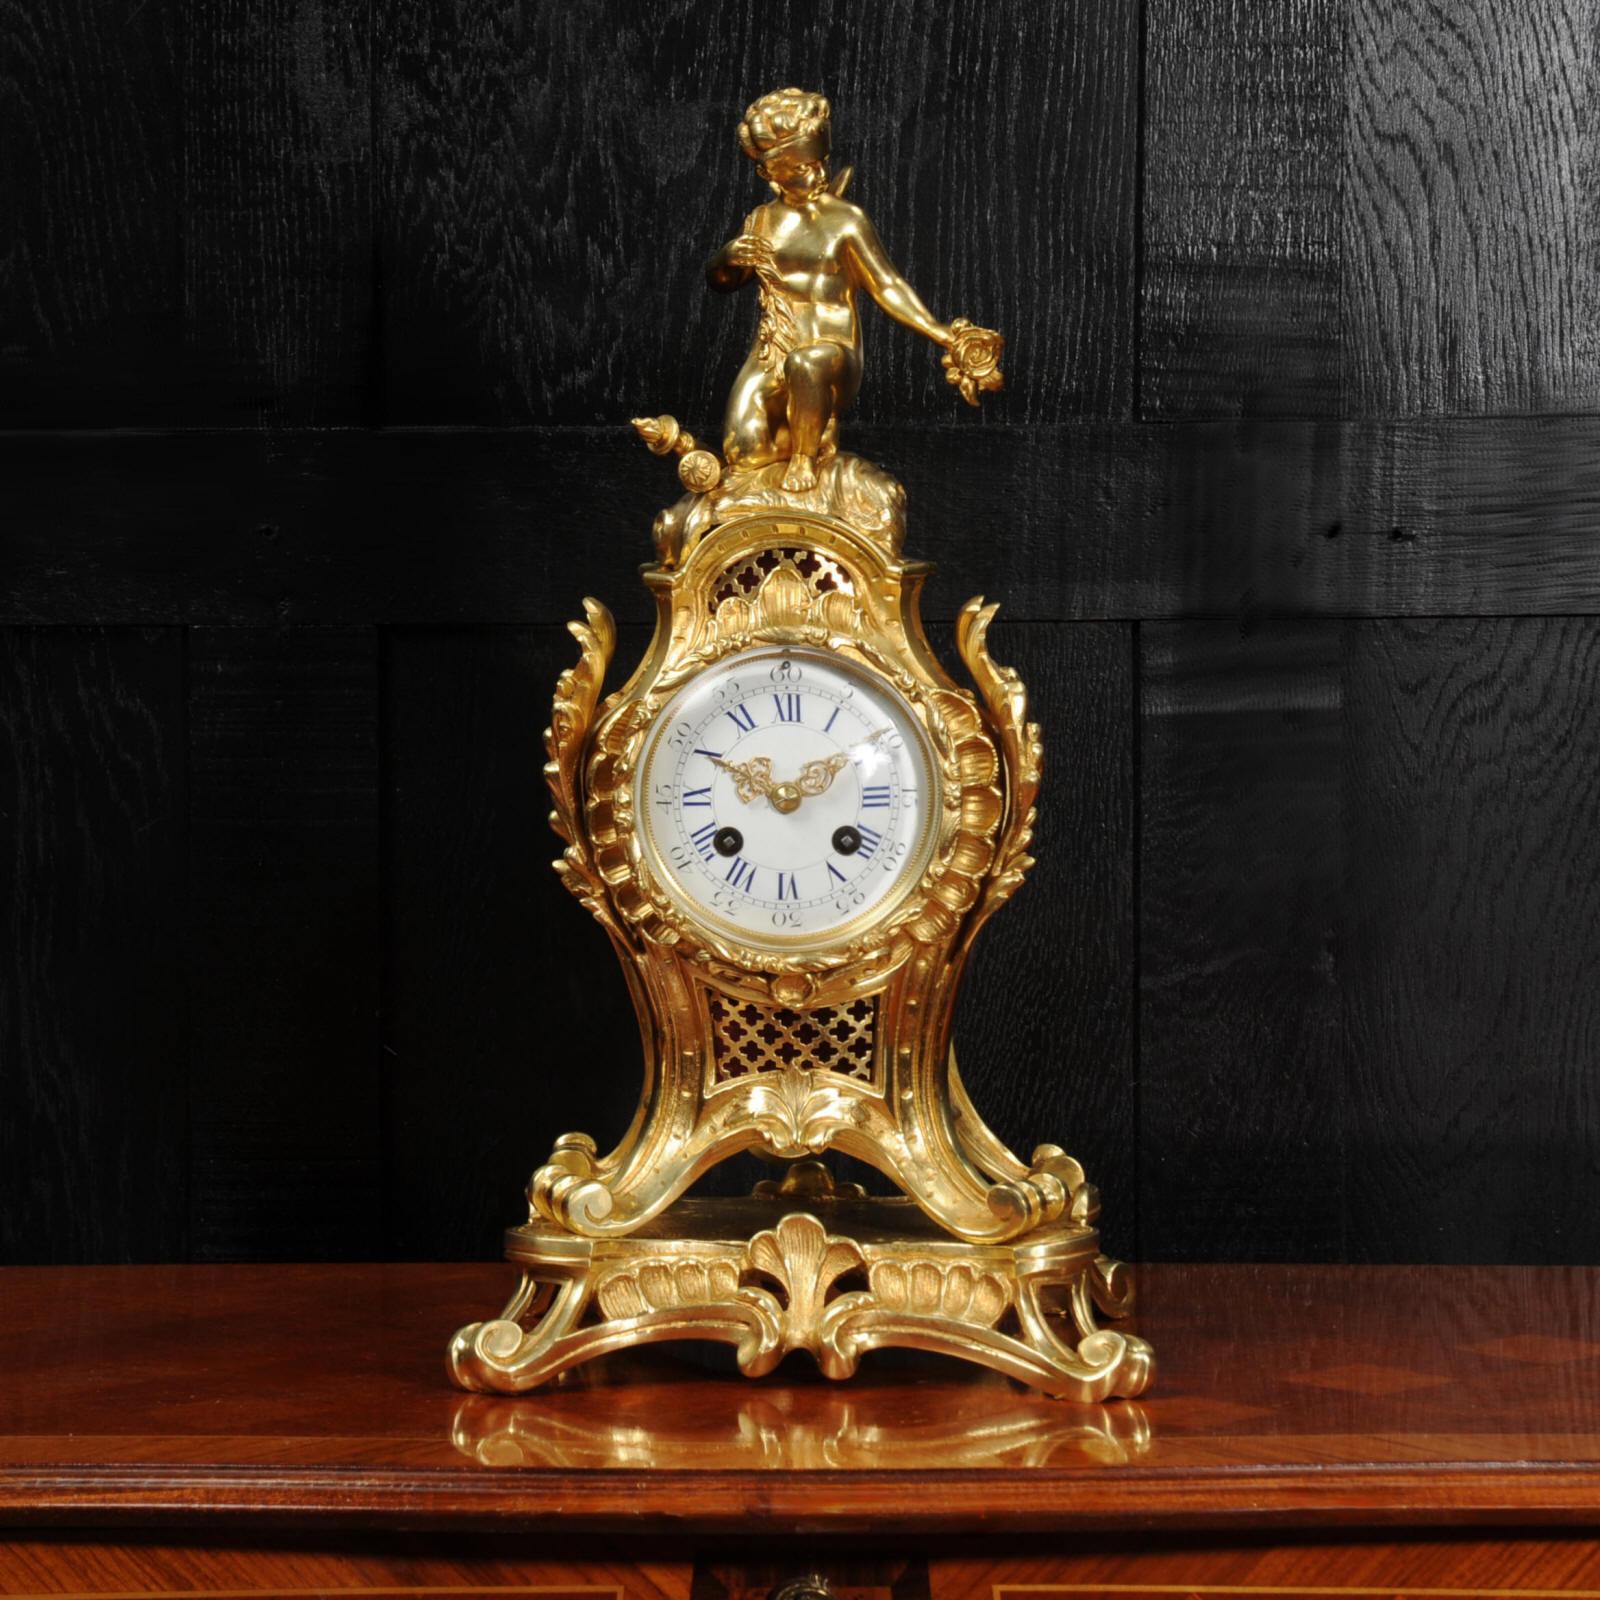 A stunning original antique French Rococo clock. The case made of finely gilded bronze in the Louis XV style of bold scrolling acanthus forming a waisted case, standing upon a base. Fabric fretted panels lighten the design. Cupid is depicted as a